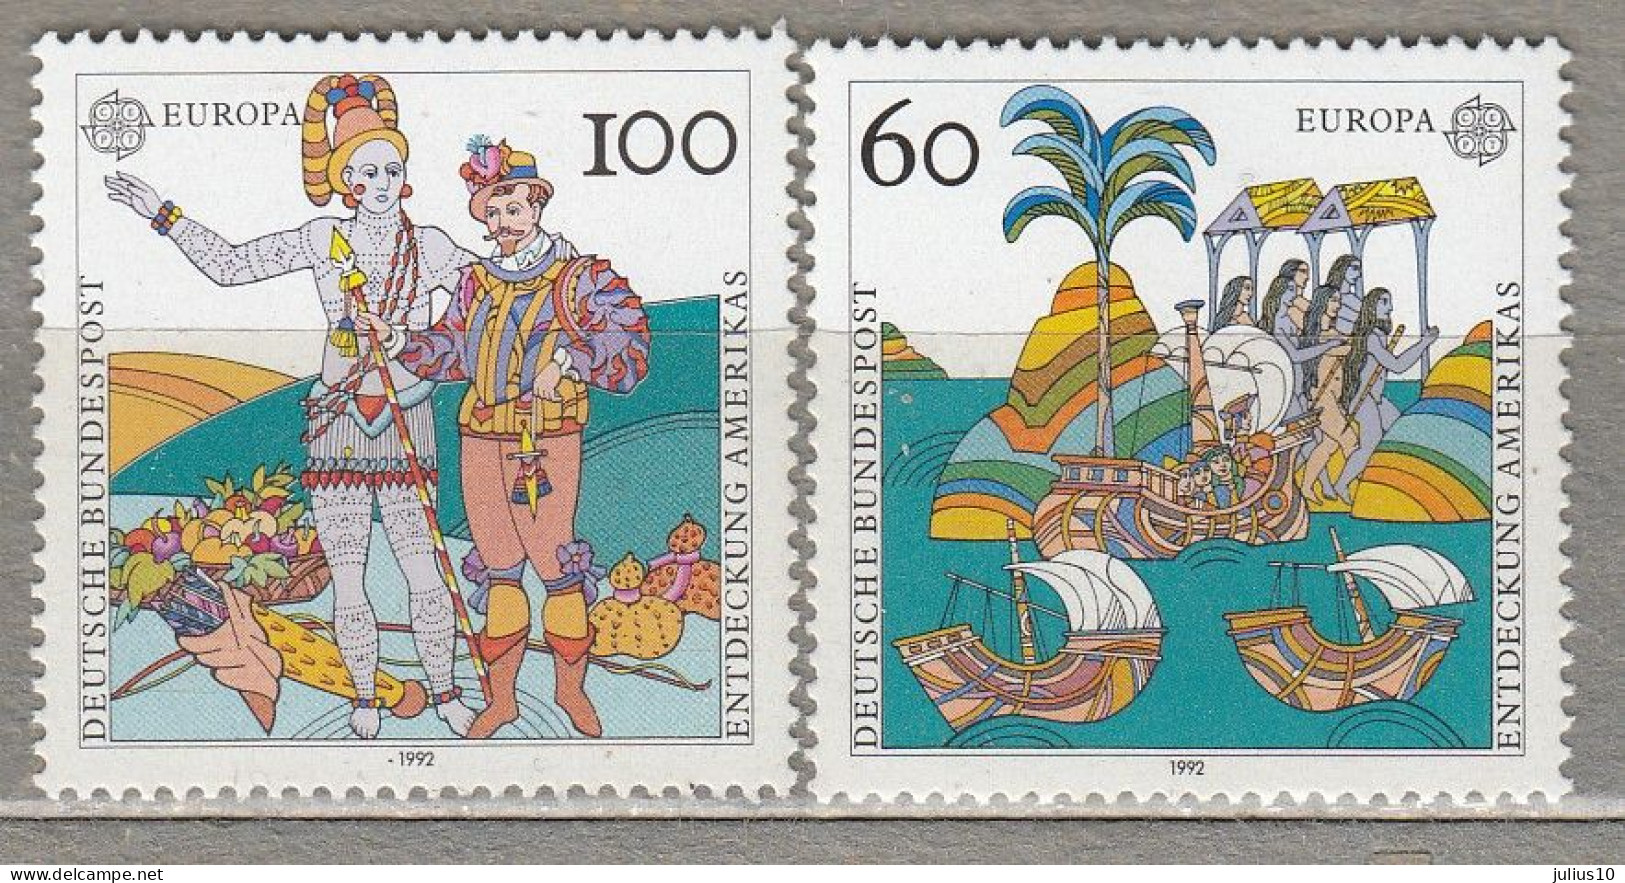 EUROPA CEPT 1992 Germany C.Colombo 500th Discovery Of America MNH(**) Mi 1608/09 #33910 - 1992